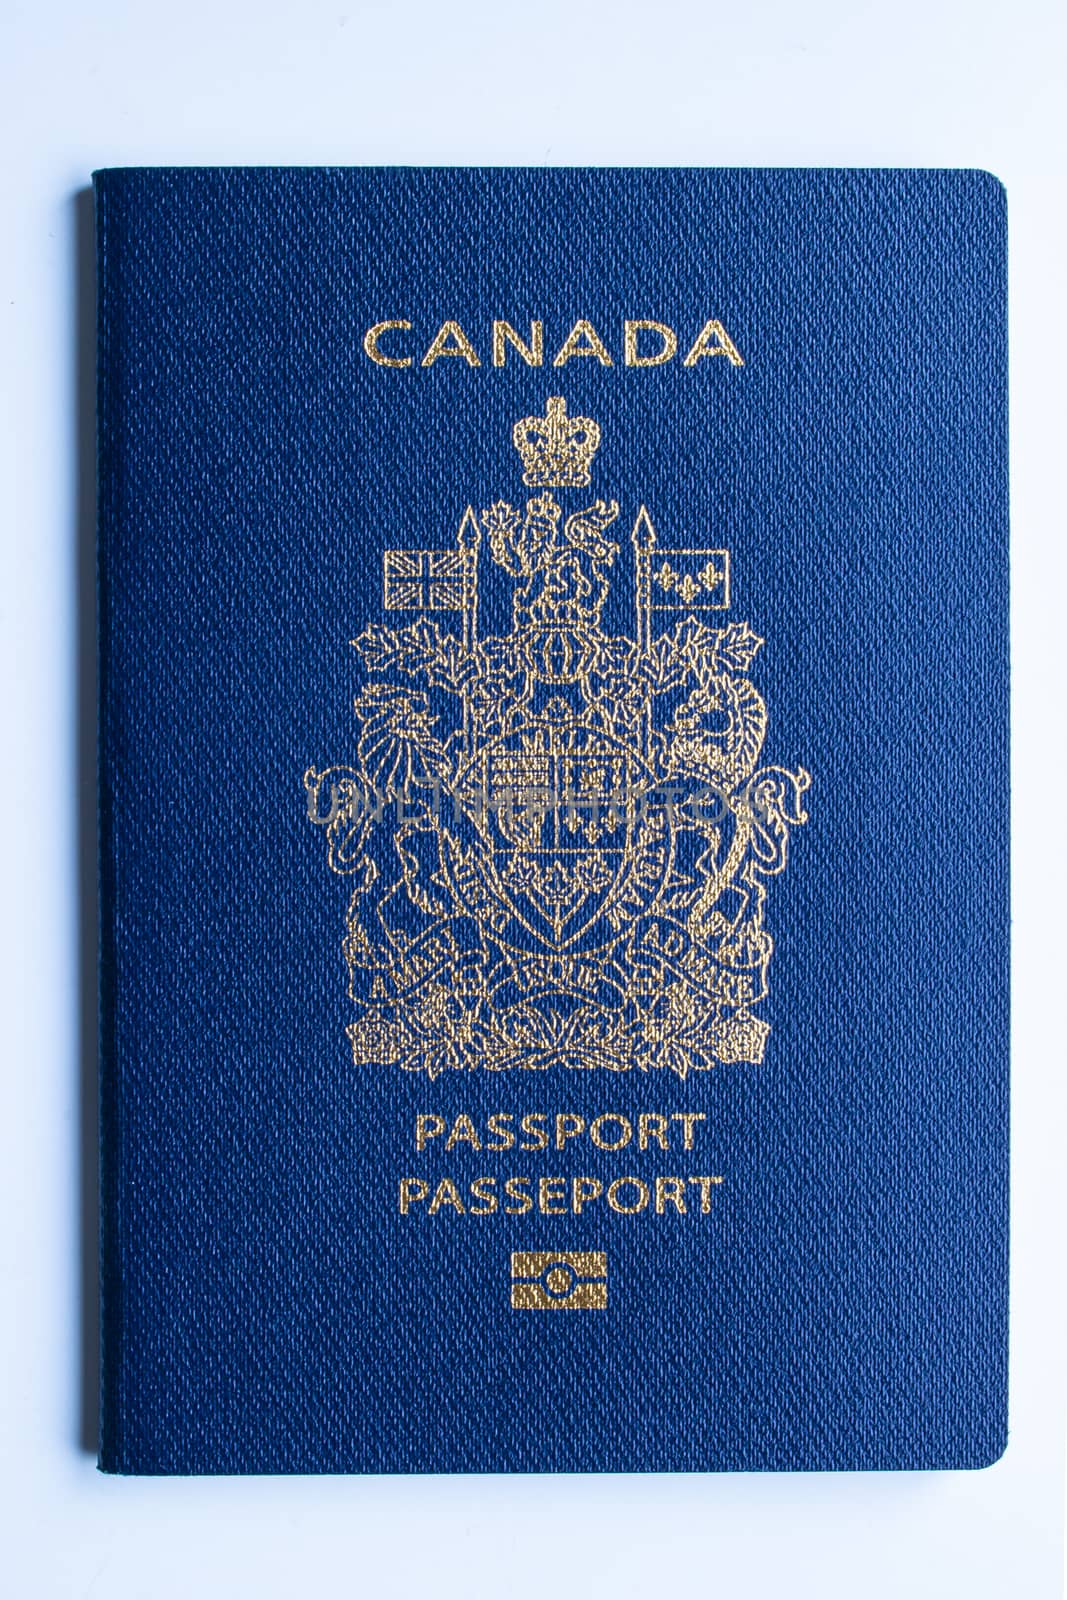 Canadian passport front cover on a white background by oasisamuel